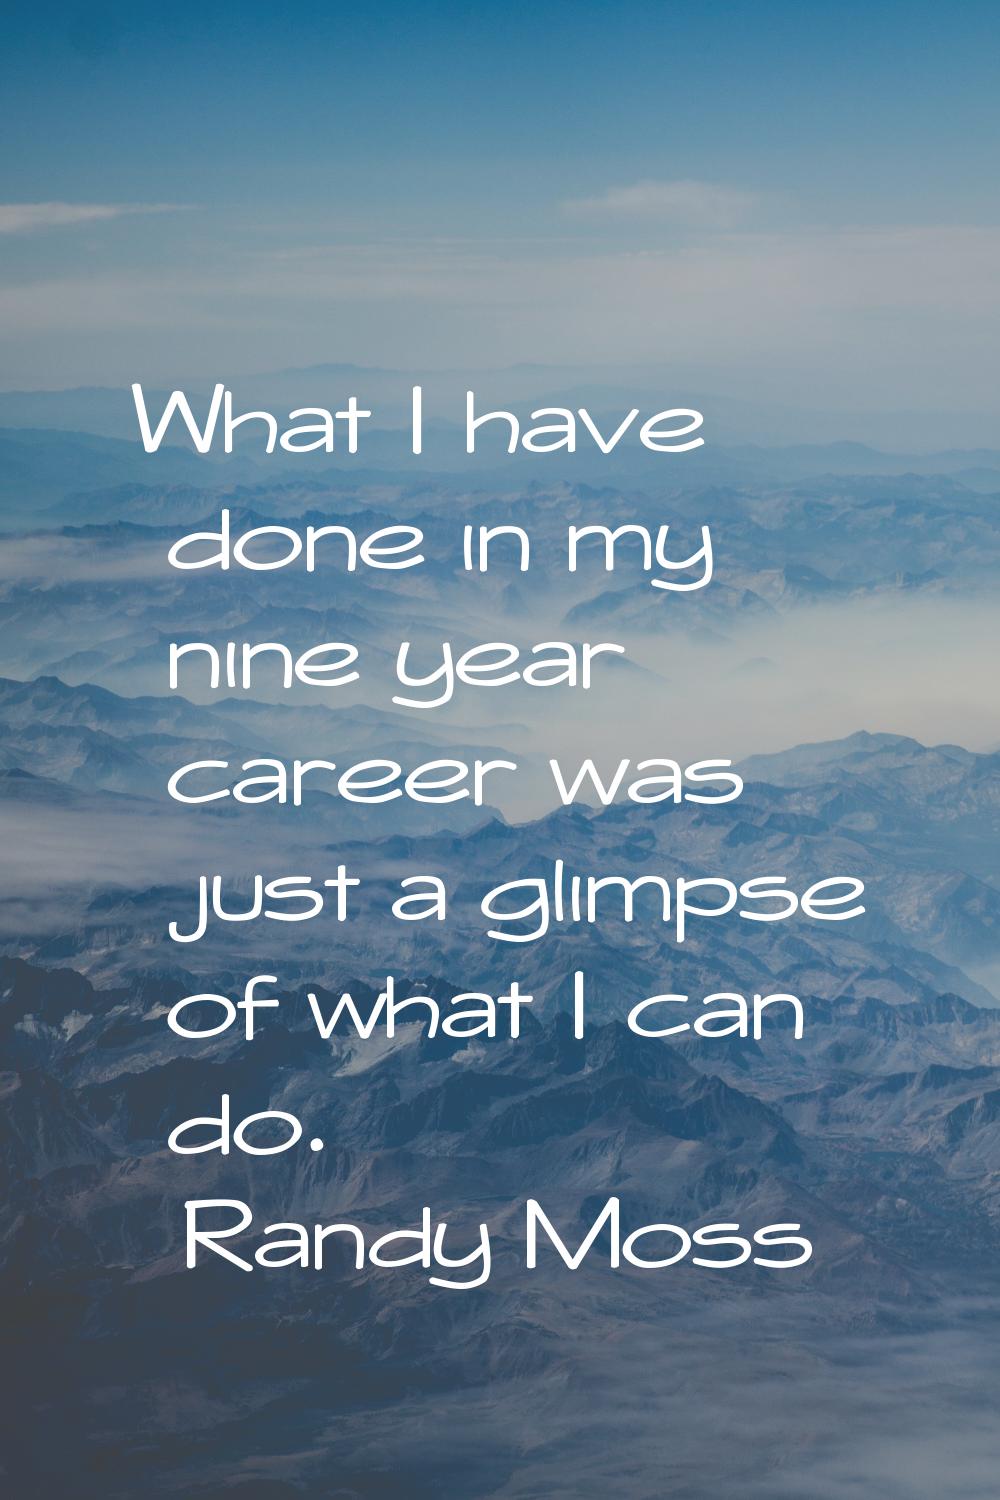 What I have done in my nine year career was just a glimpse of what I can do.